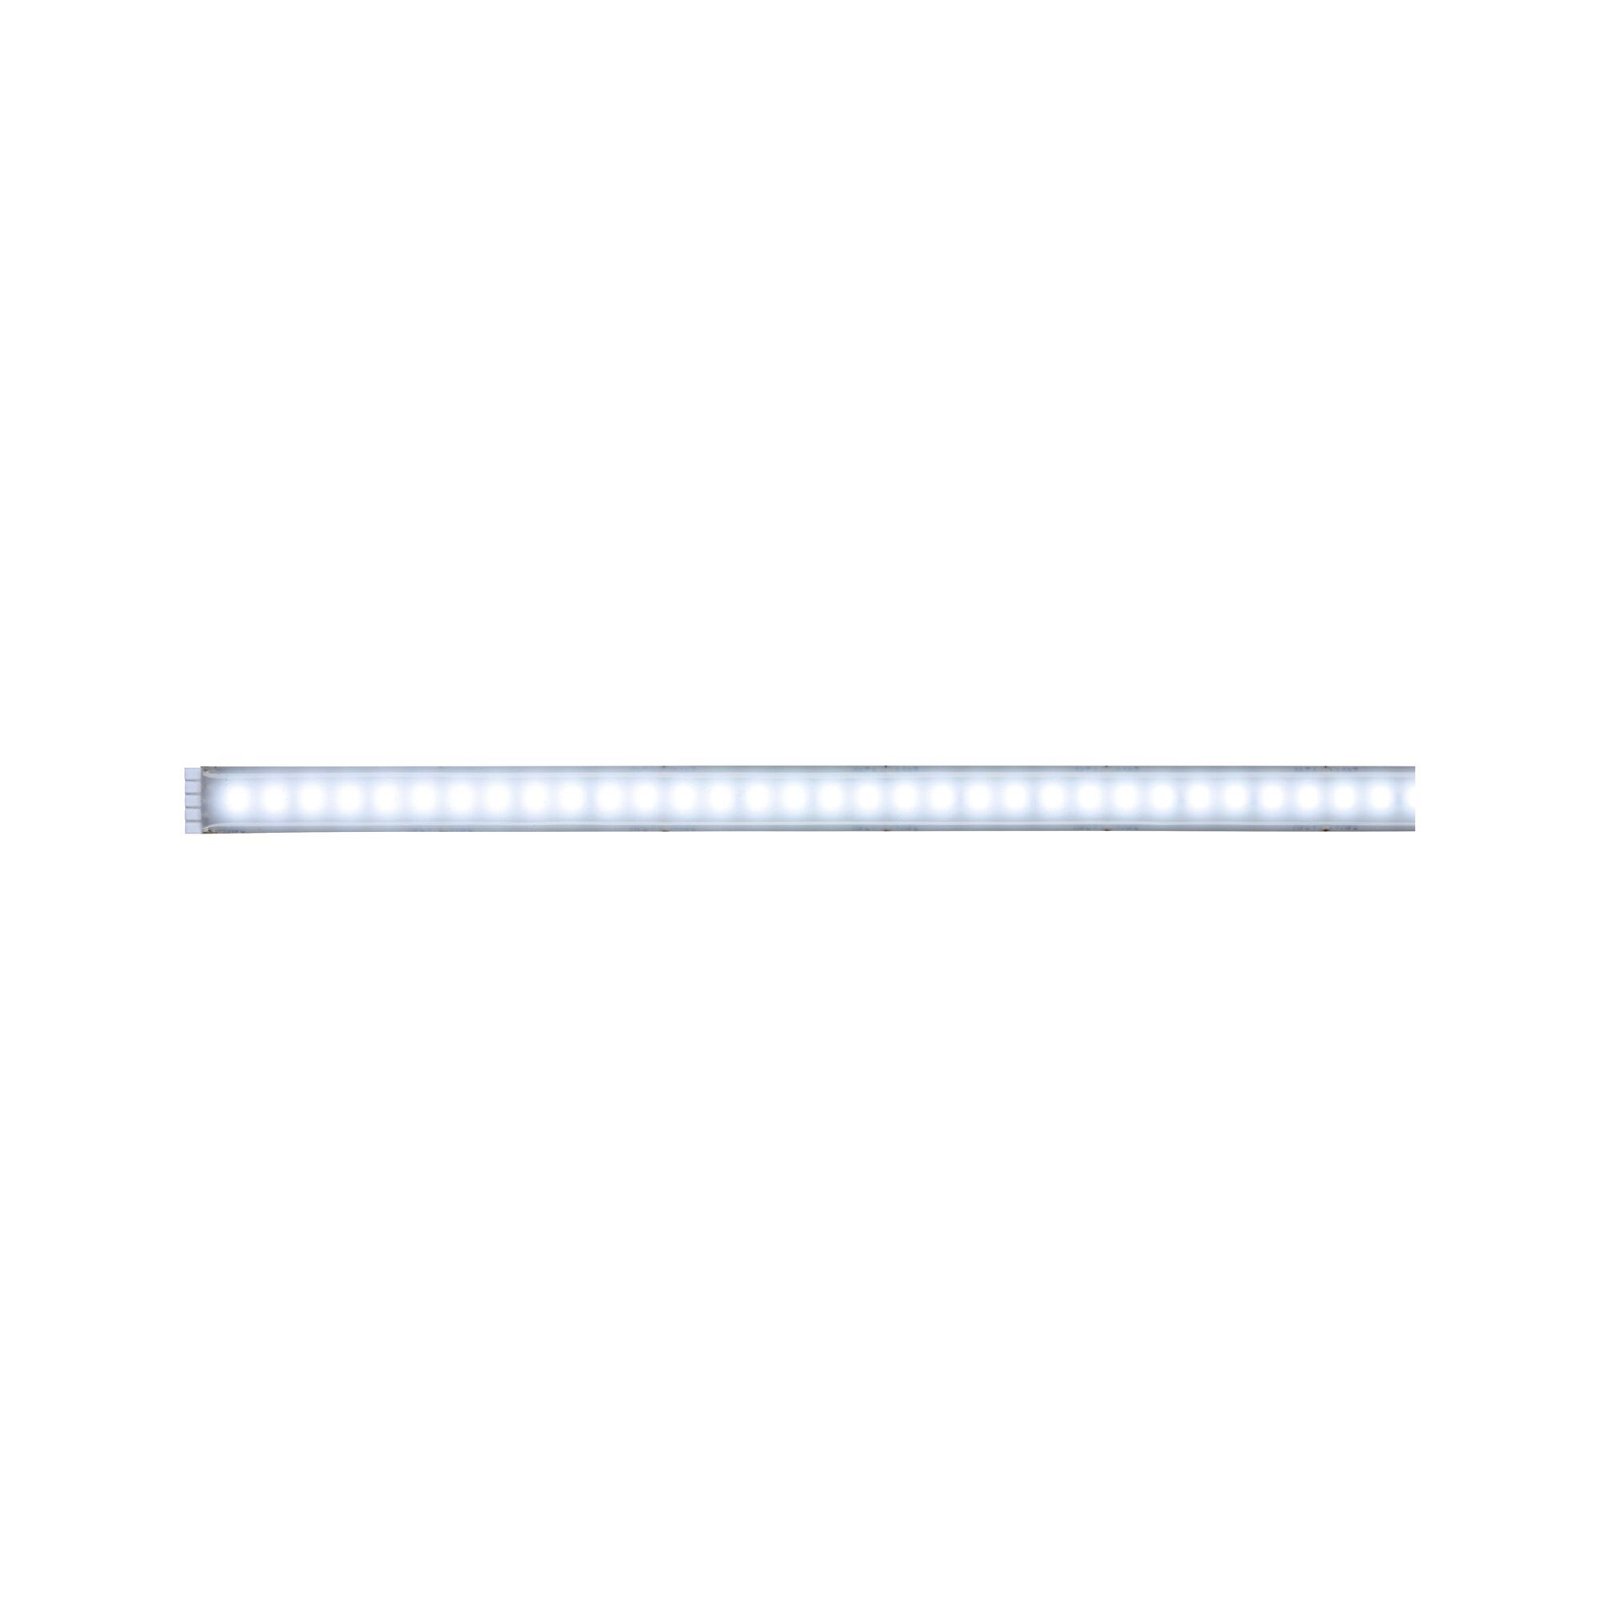 MaxLED 1000 LED Strip Daylight white 1m protect cover 12W 880lm/m 6500K